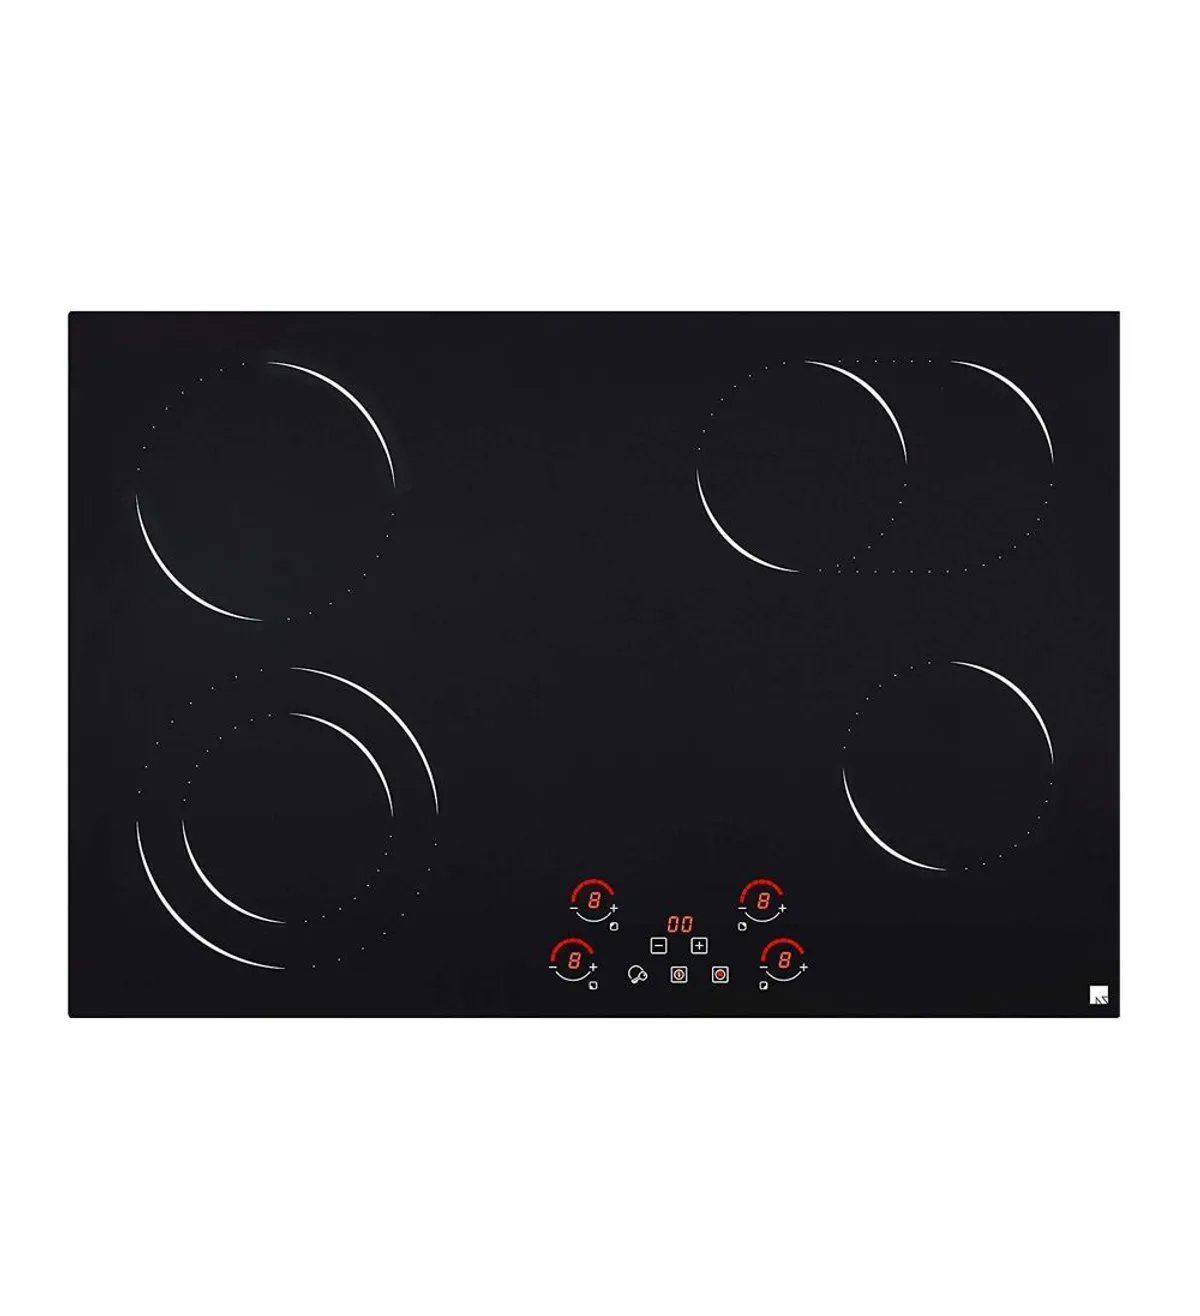 Ramblewood 30 Inch Electric Cooktop review